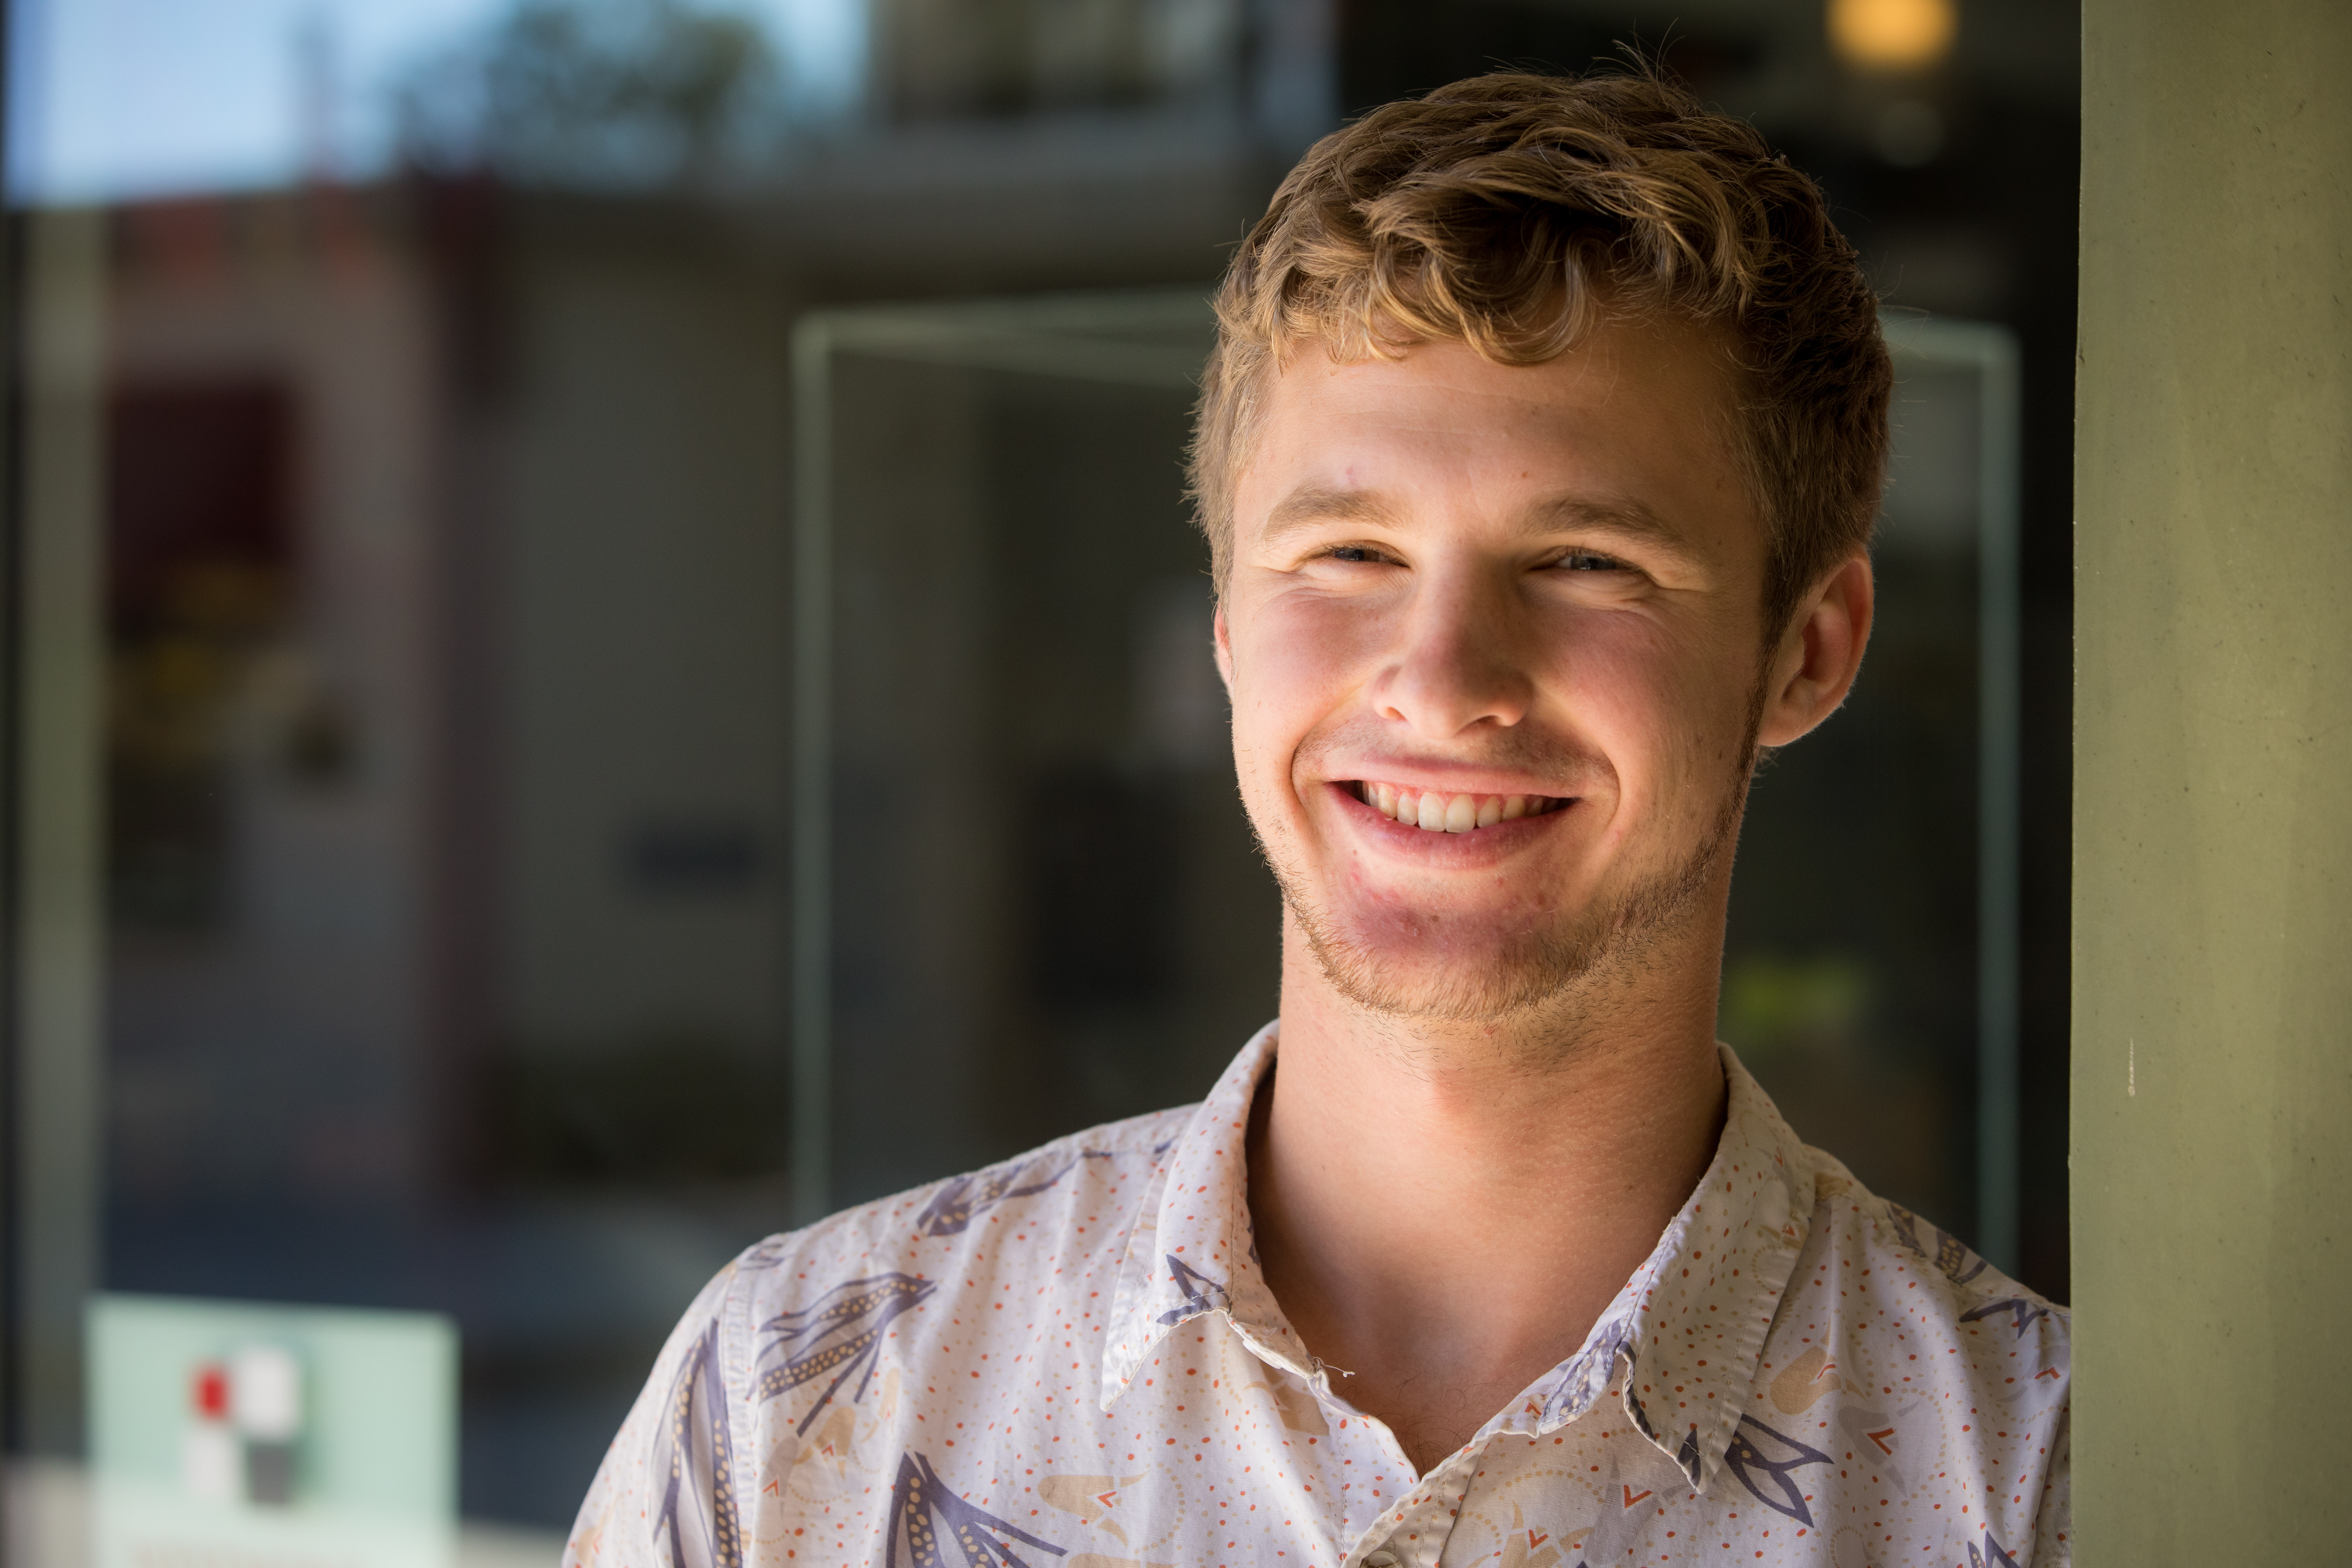 Gabriel Gabrowski, a Fulbright recipient, will travel to Argentina this spring to work with college students 